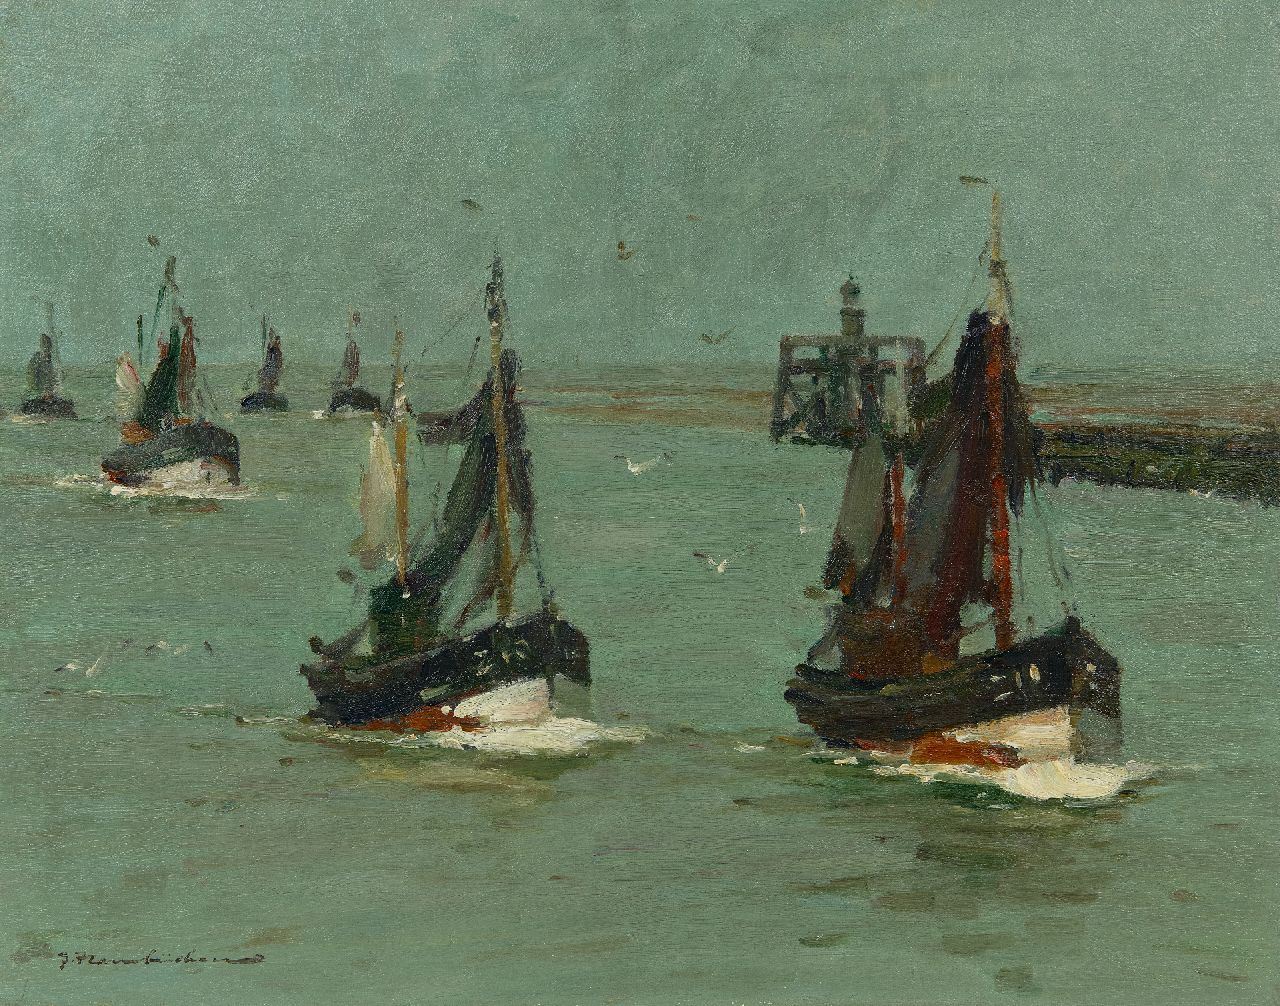 Hambüchen G.  | Georg Hambüchen | Paintings offered for sale | Incoming fishing boats, oil on canvas 40.2 x 50.4 cm, signed l.l.